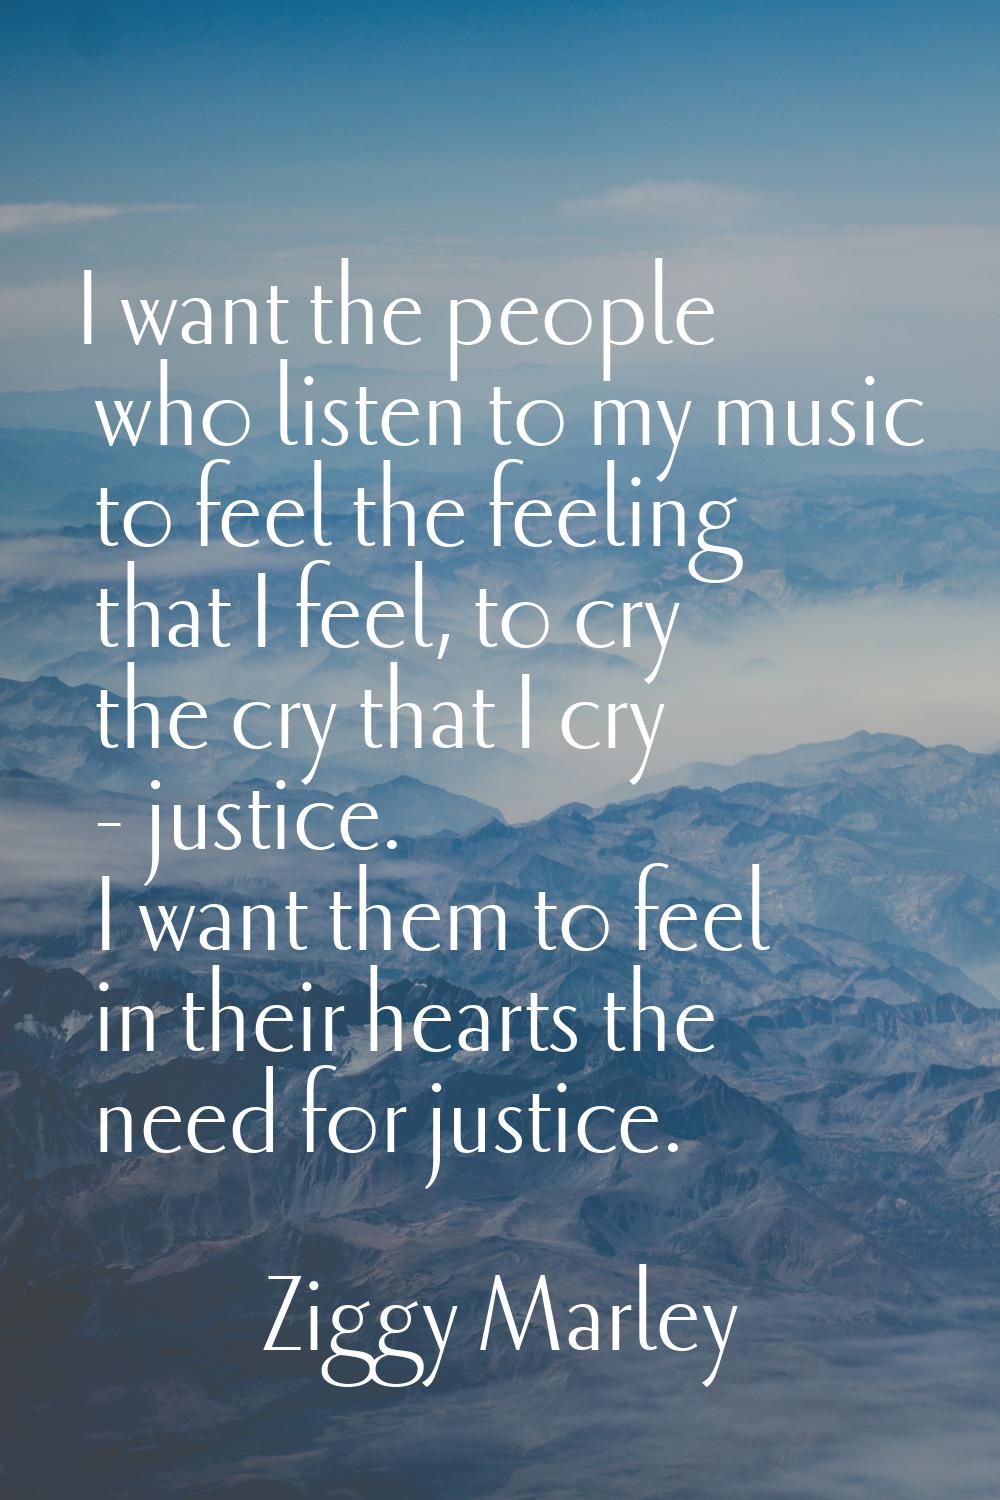 I want the people who listen to my music to feel the feeling that I feel, to cry the cry that I cry